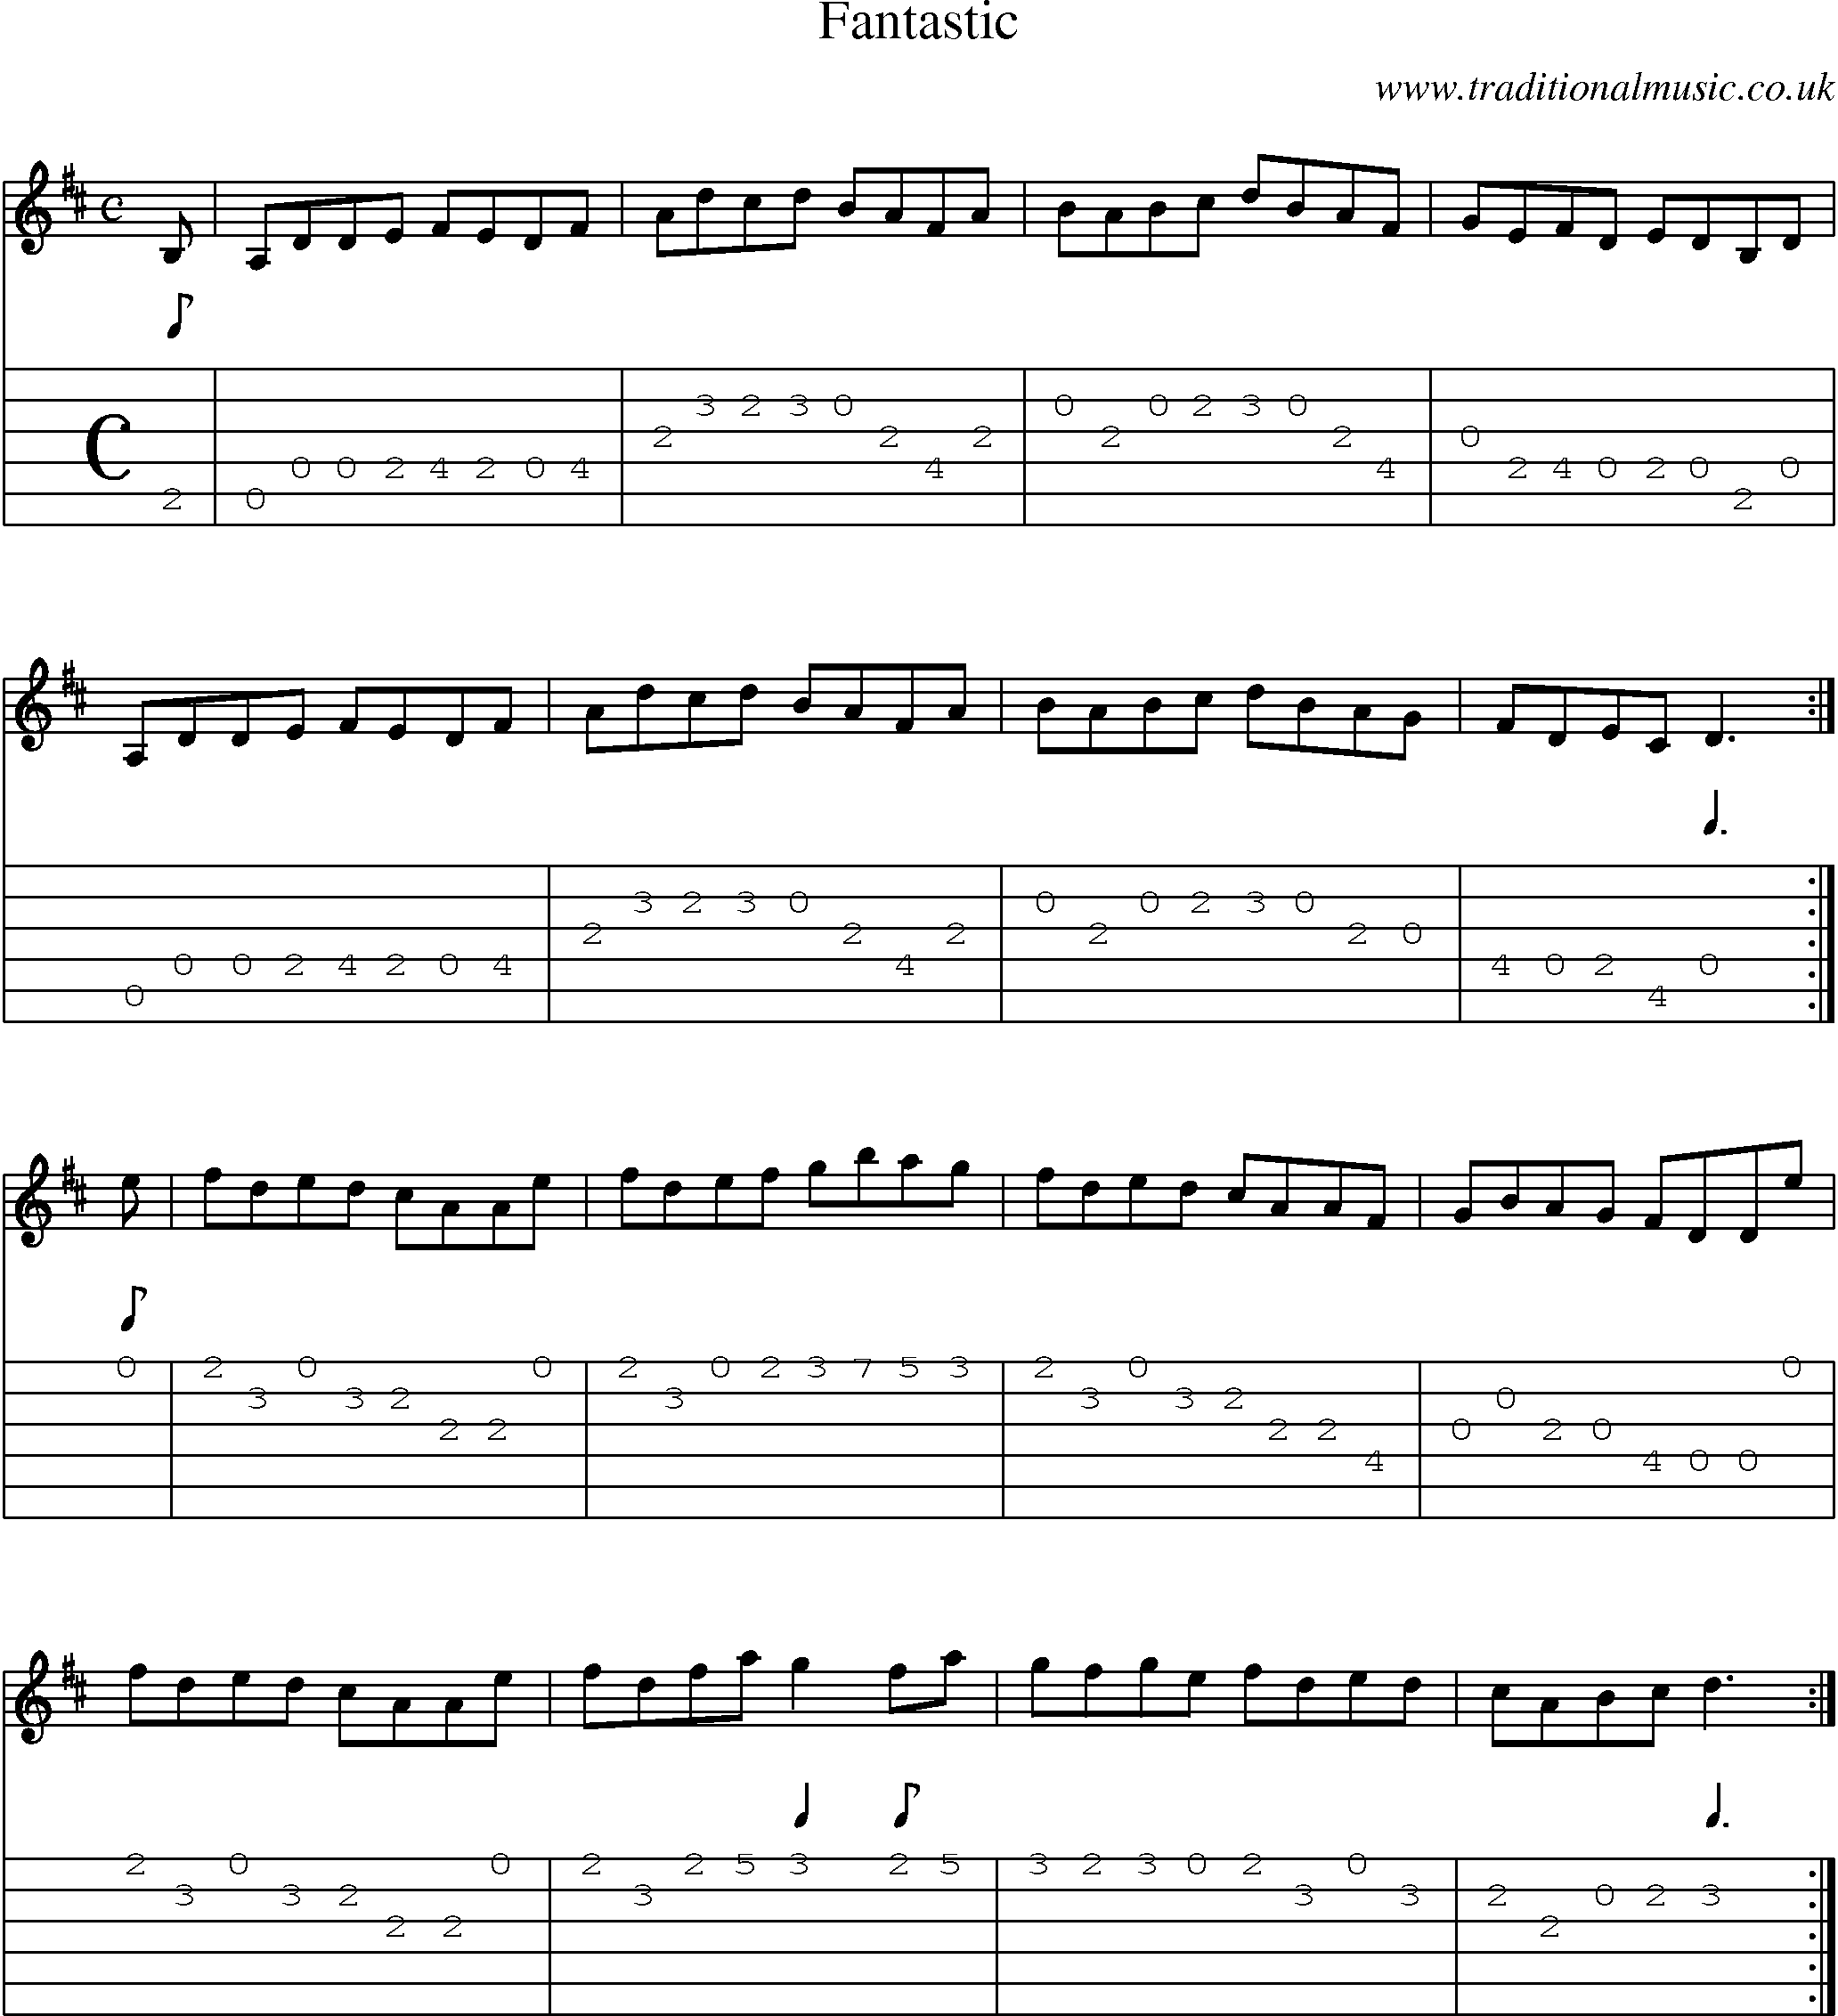 Music Score and Guitar Tabs for Fantastic